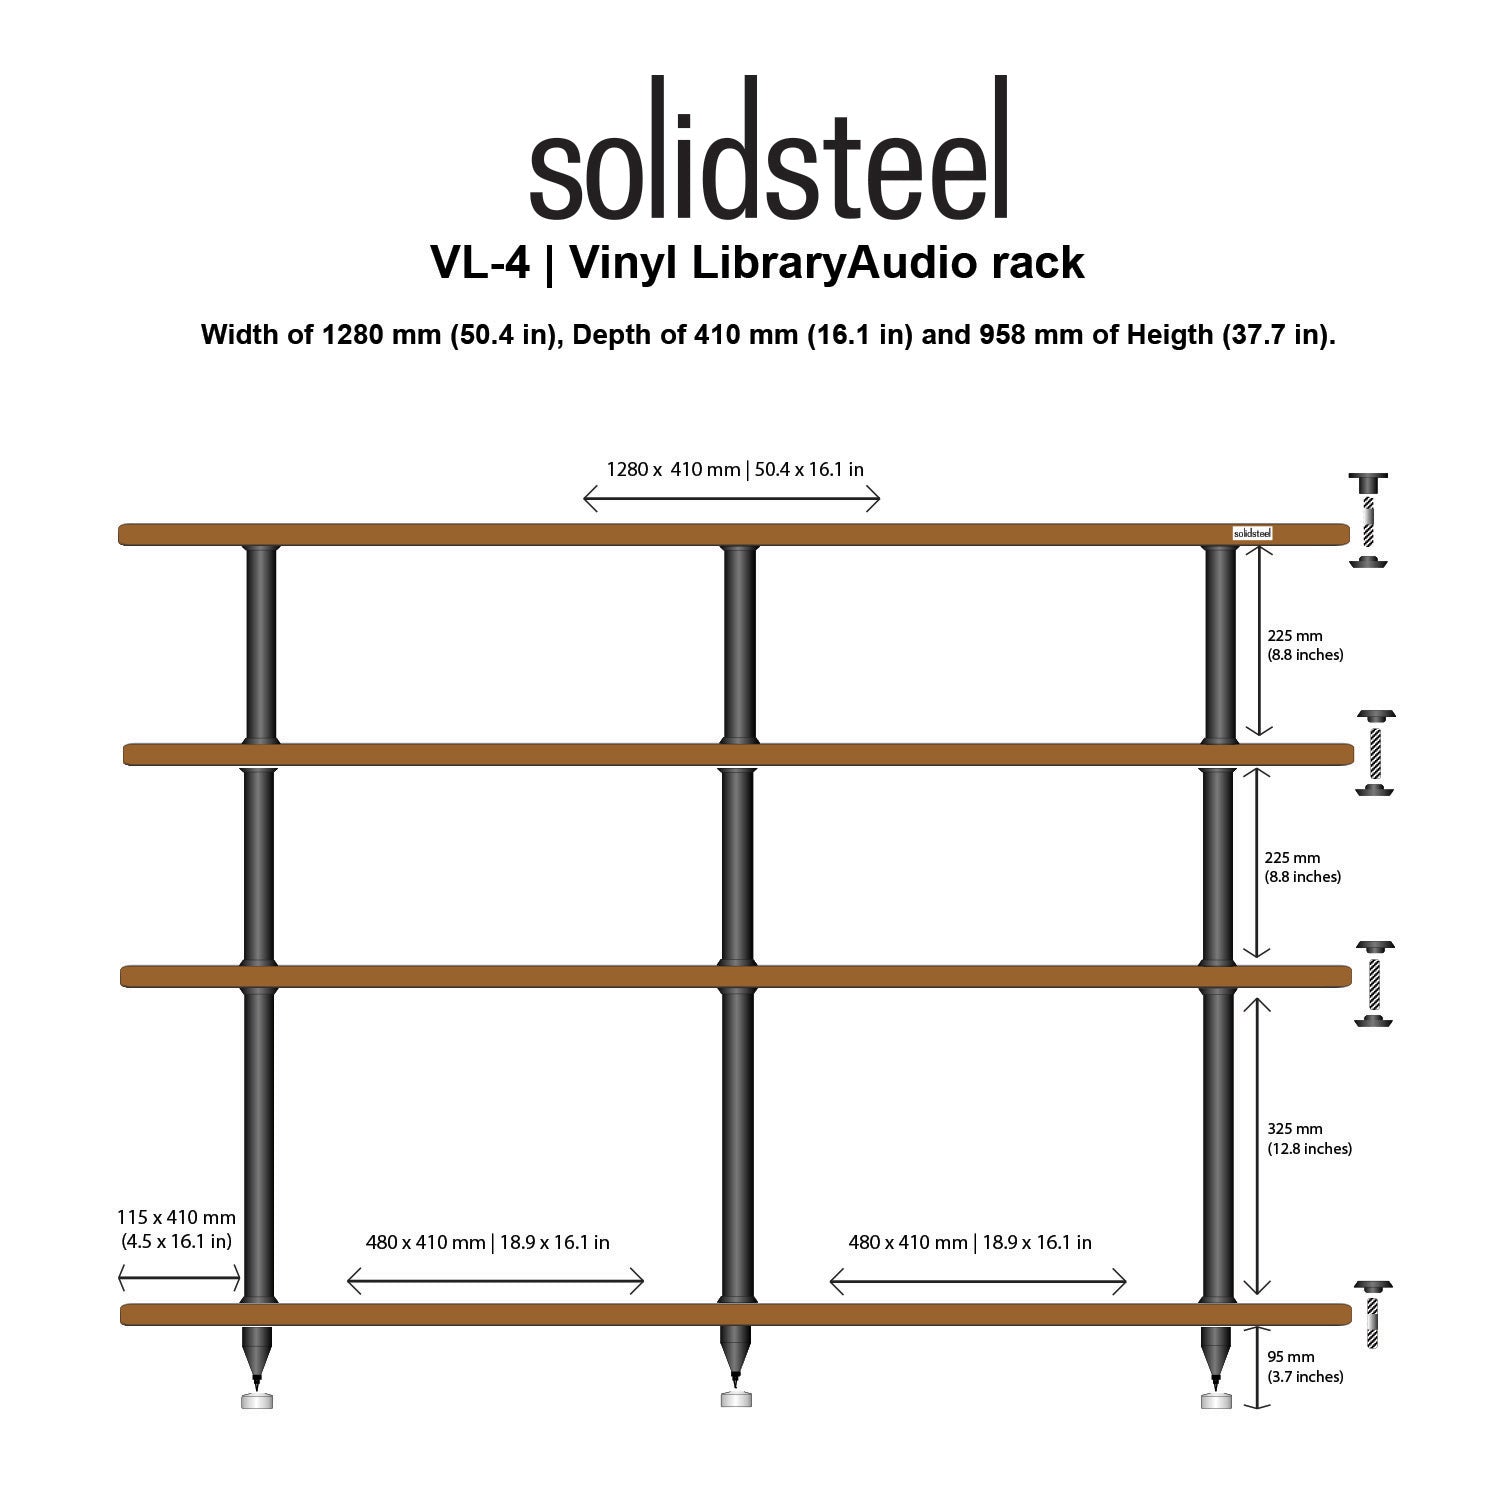 solidsteel - Browse our selection of Solidsteel racks, stands, and shelves to organize your audio equipment and enhance your home audio setup. Shop now the Solidsteel HI-FI & High-End AV Furniture -Solidsteel S Series & VL Series - Solidsteel Hyperspike Series